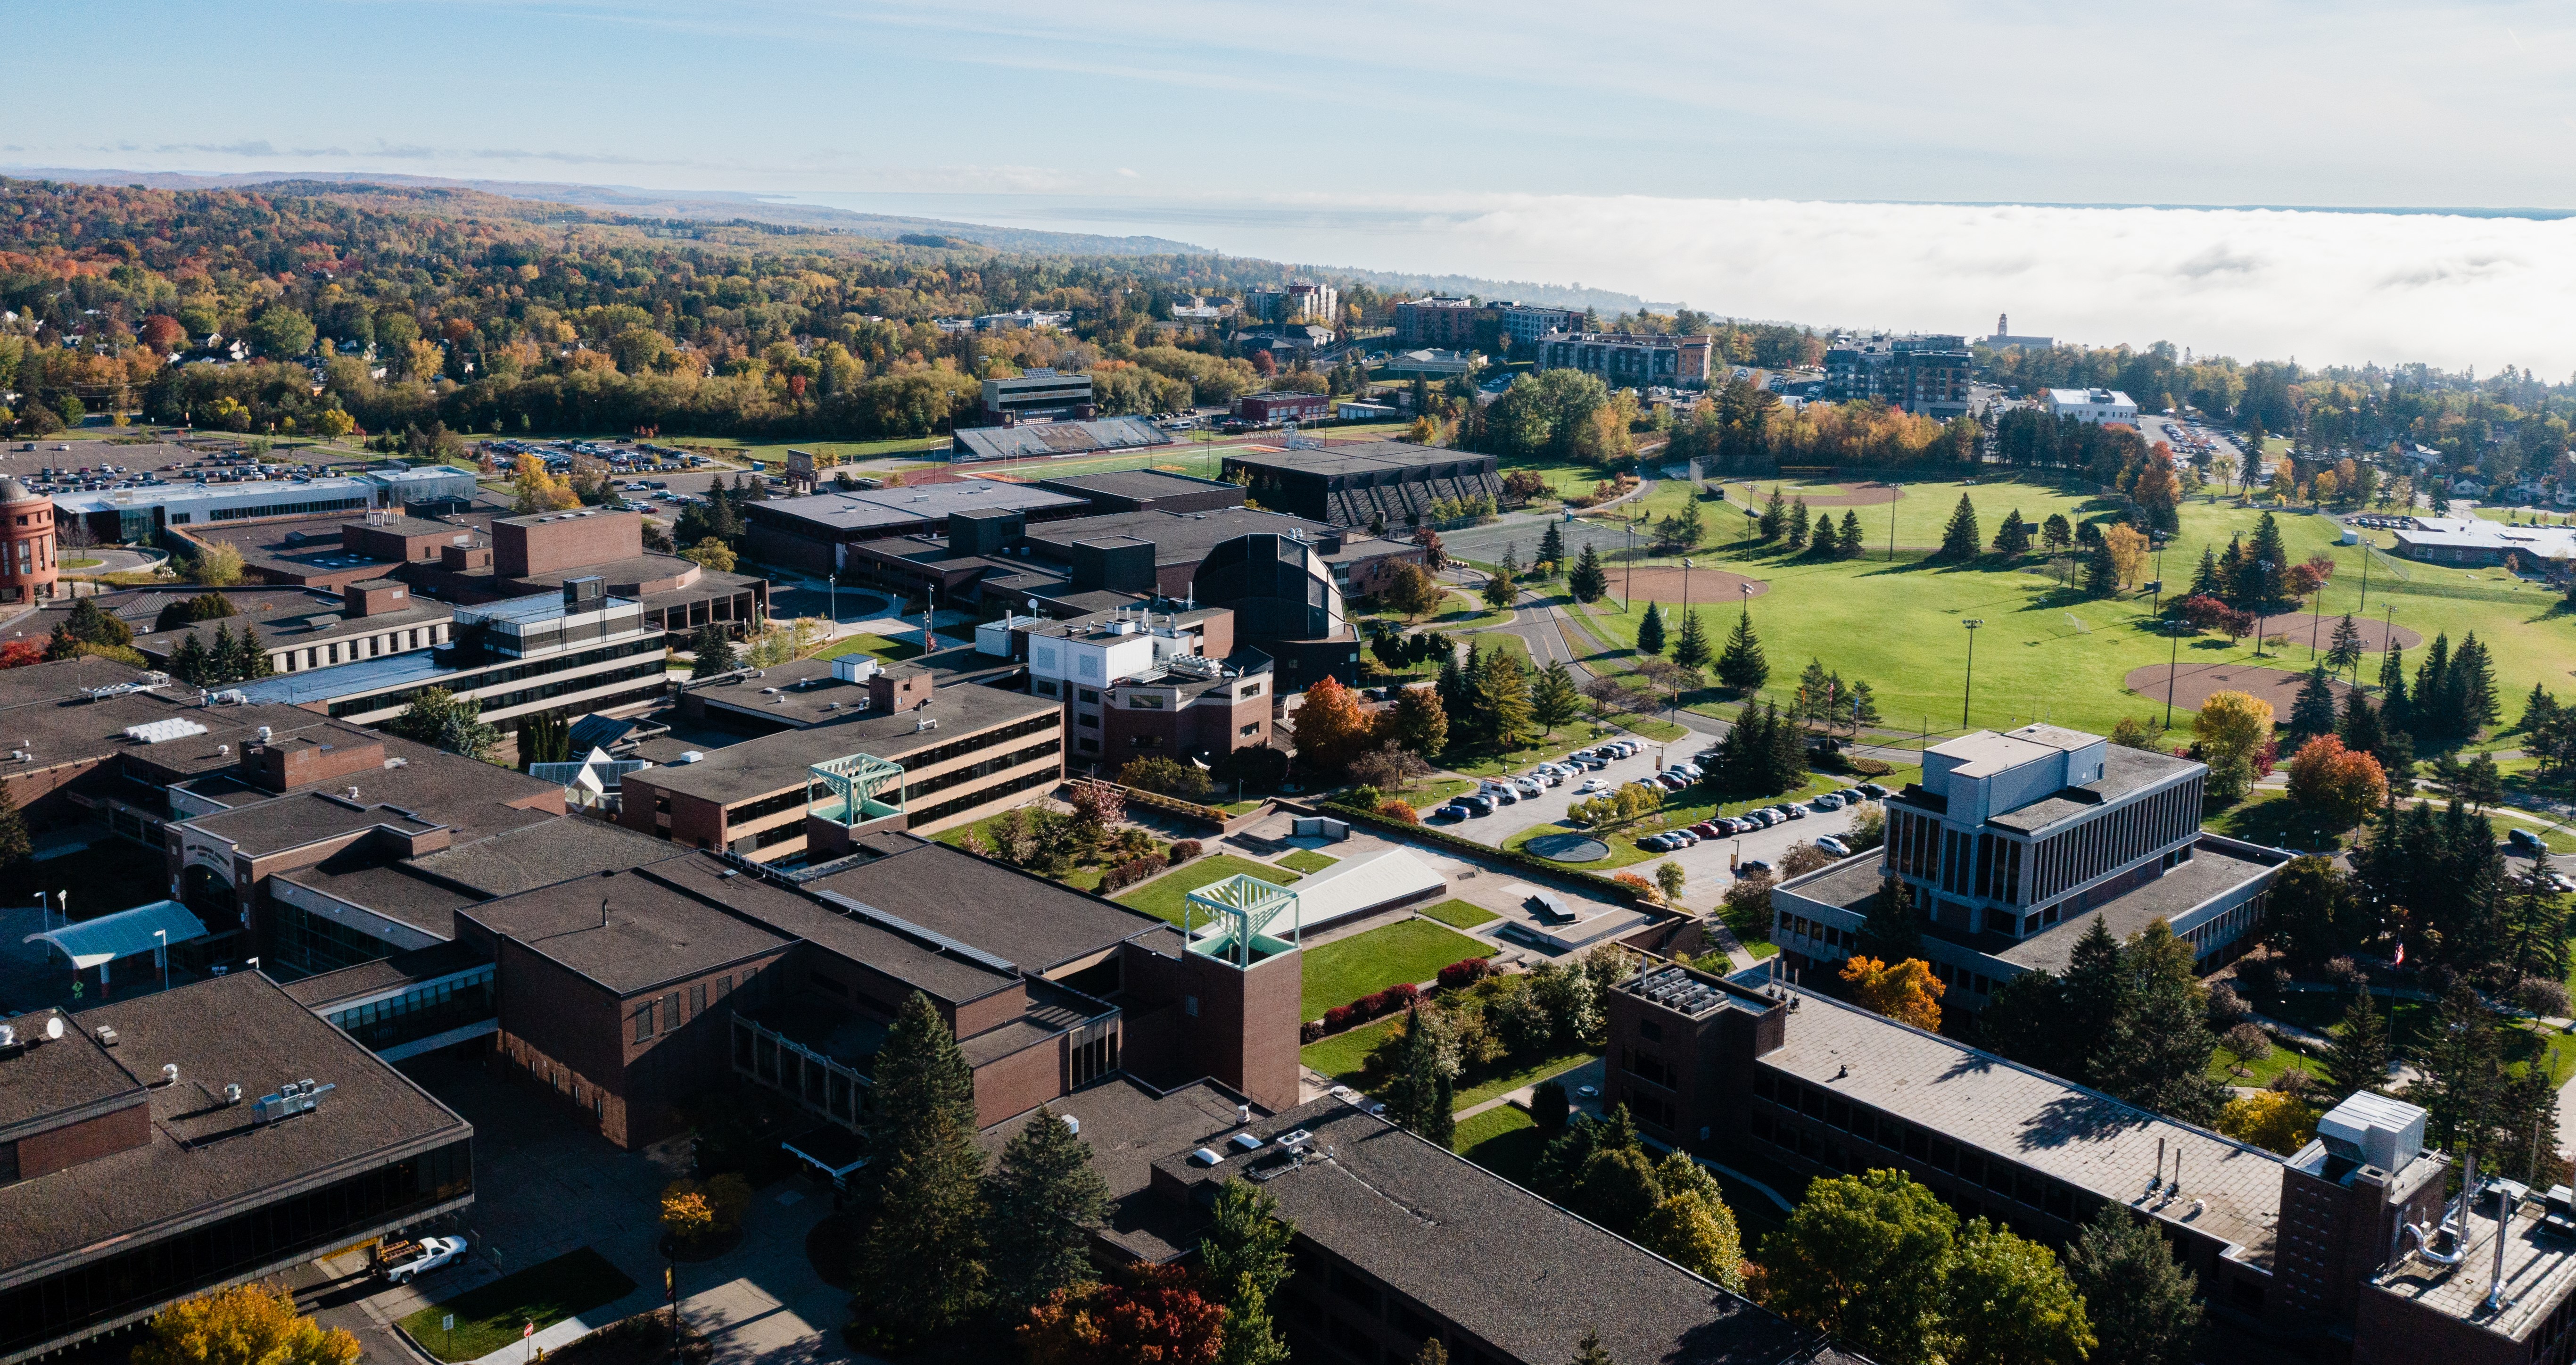 Aerial view of campus, showcasing various buildings, greenspace, and a spectacular cloud inversion over Lake Superior